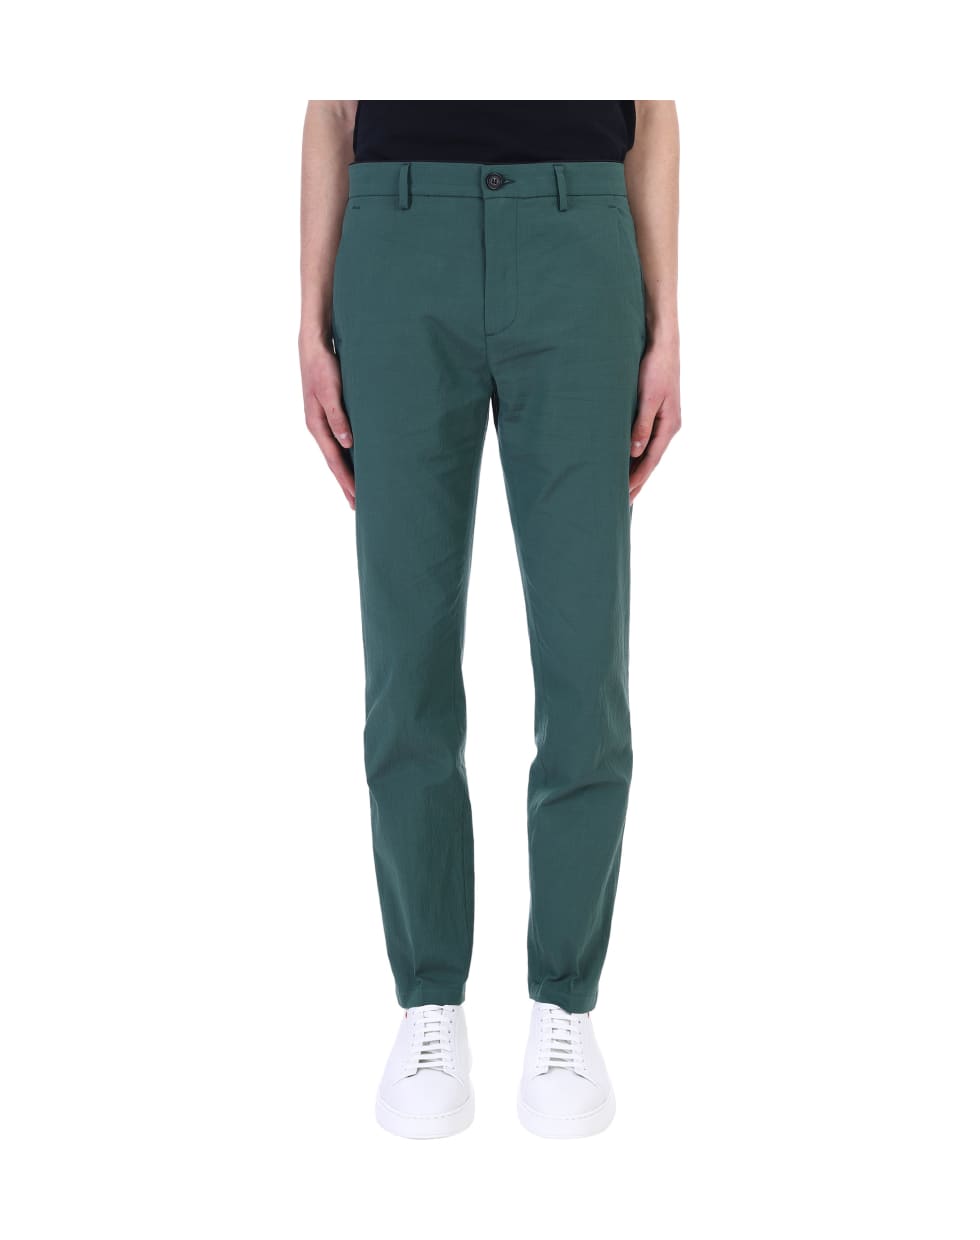 Department Five Pants In Green Cotton - green